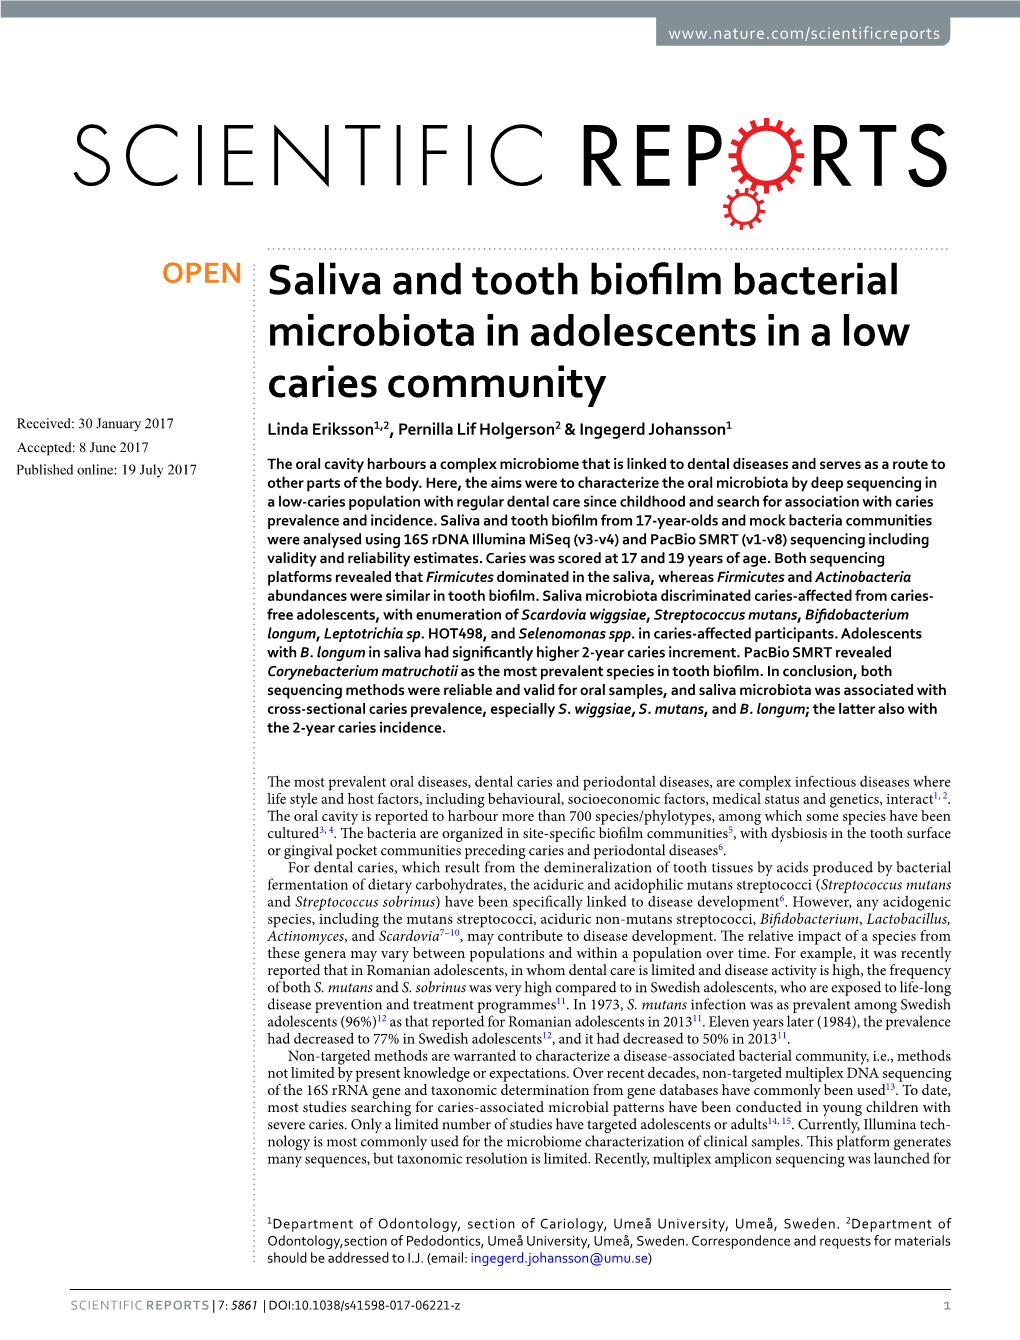 Saliva and Tooth Biofilm Bacterial Microbiota in Adolescents in a Low